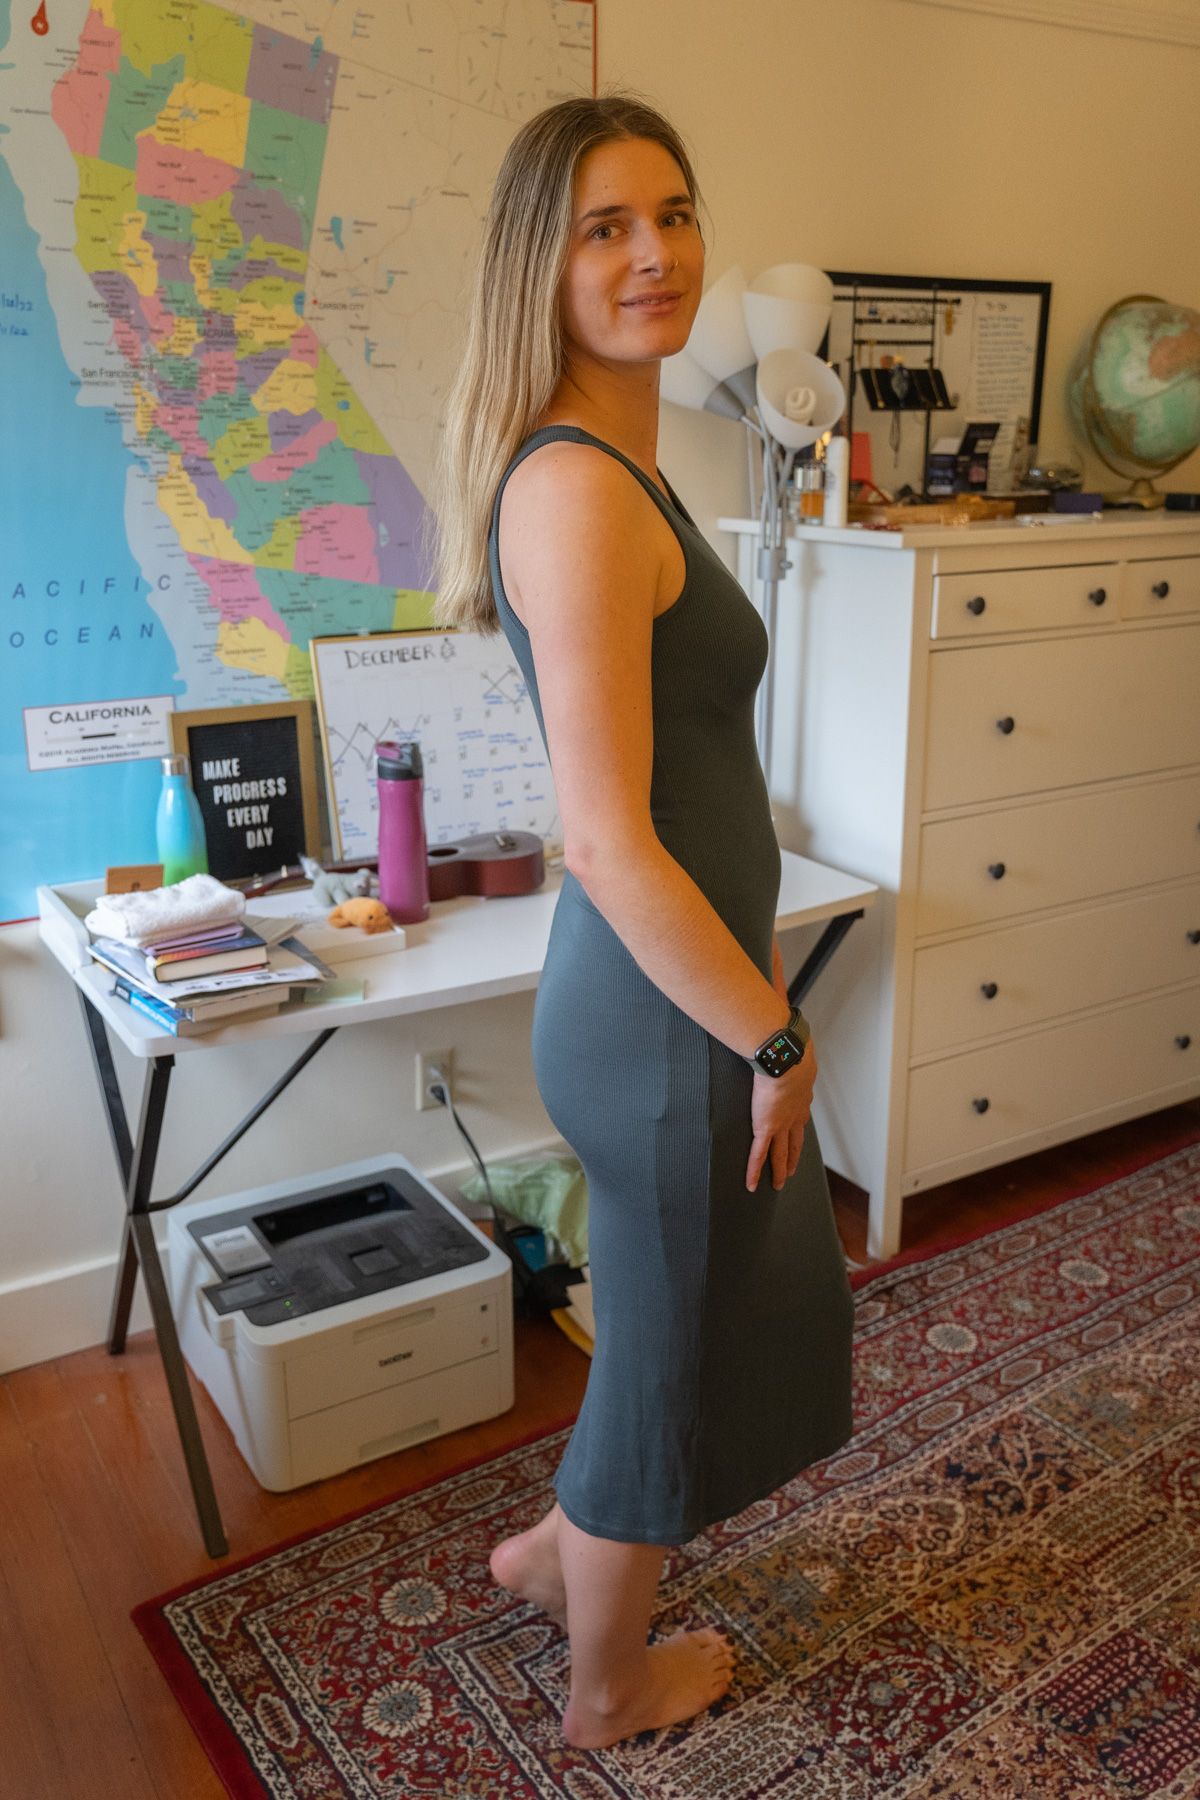 A young woman wearing a grey Tencel Rib Knit Sleeveless Dress stands to the side, smiling over her shoulder in an interior setting with a map of California on the wall behind her.